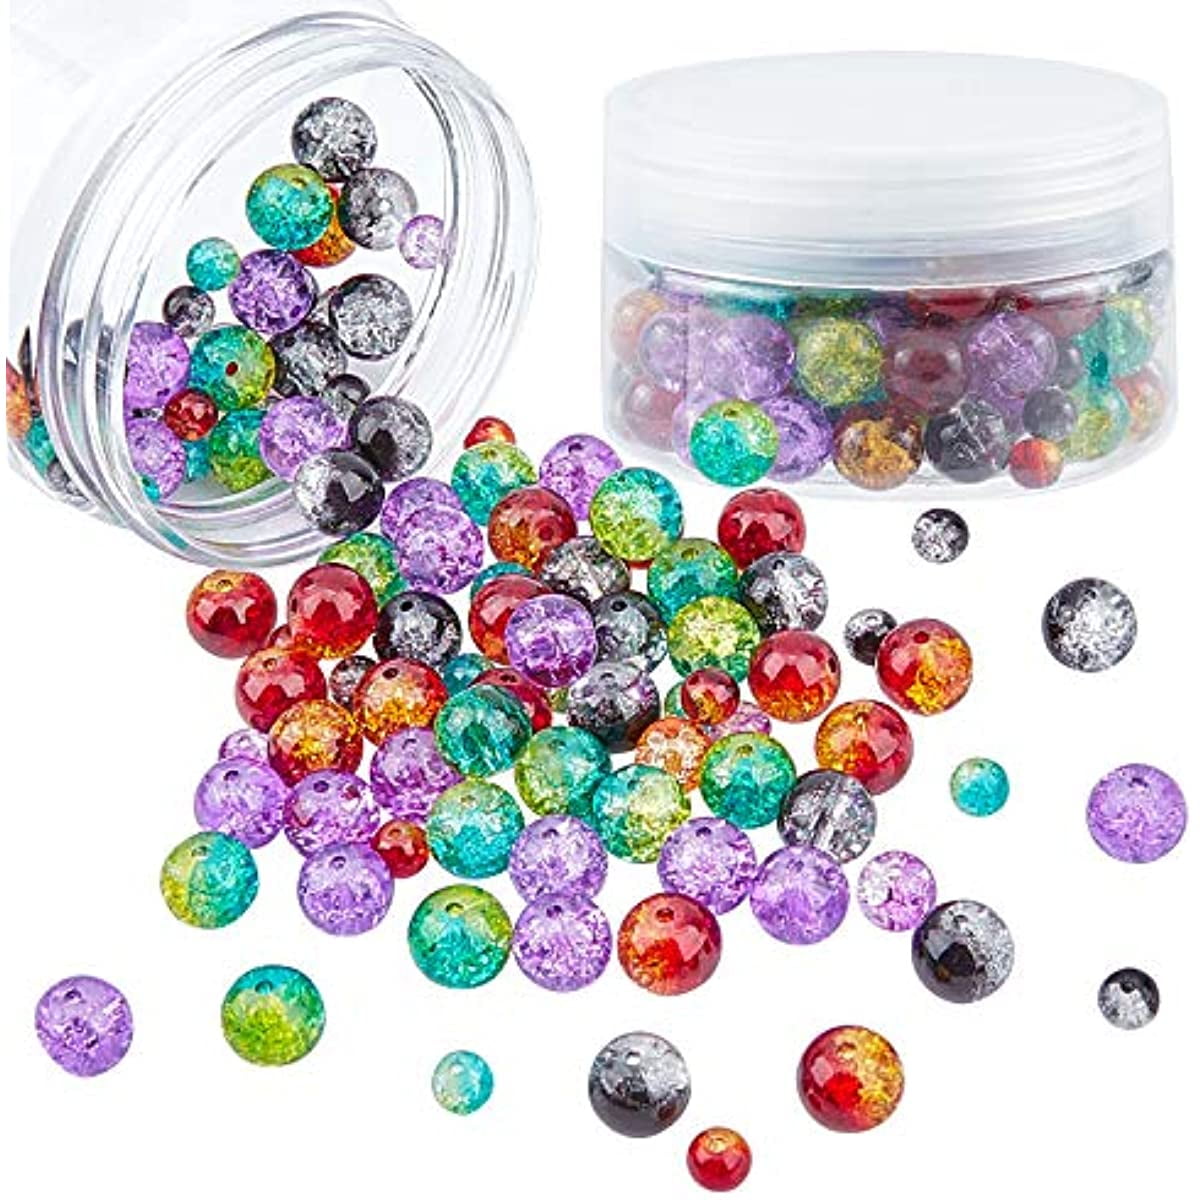 Suhome 1920pcs 8 Color Crackle Lampwork Glass Beads 4mm 6mm 8mm Handcrafted  Round Spacer Loose Beads for Jewelry Making